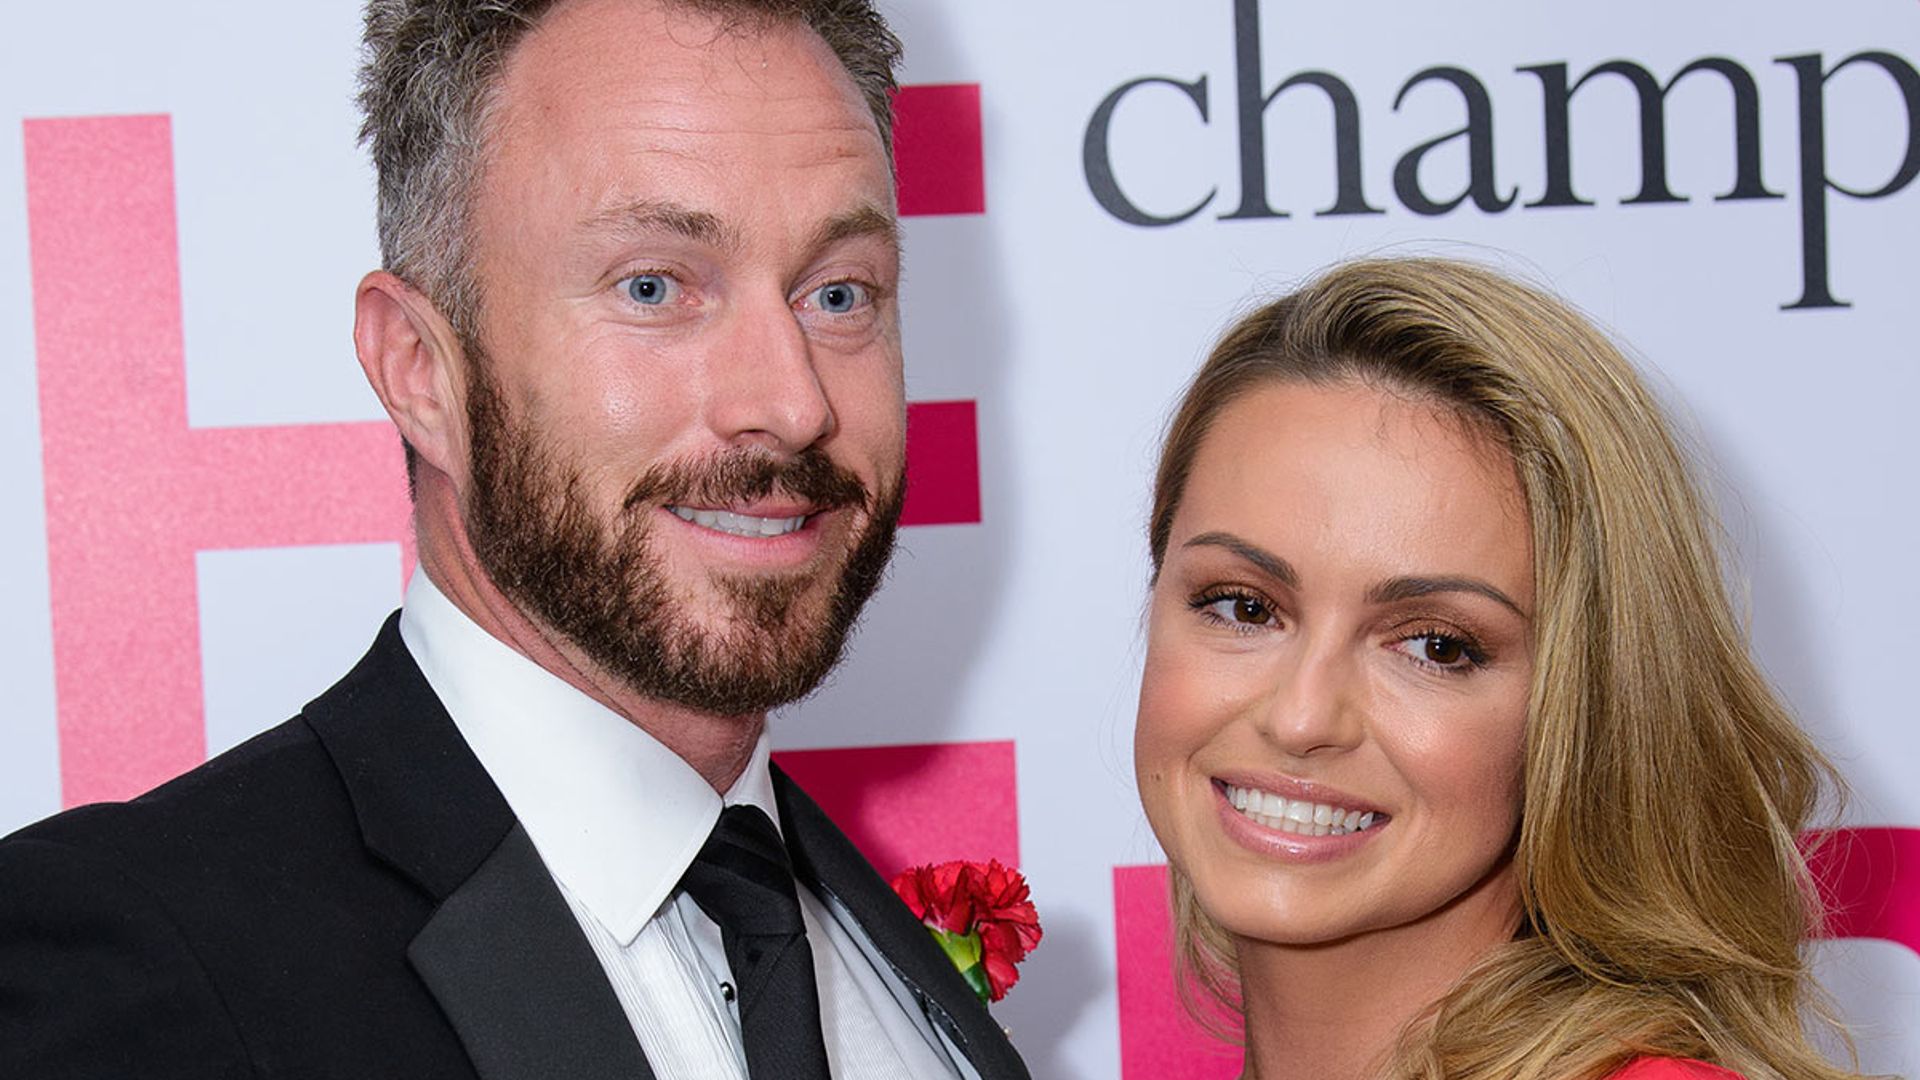 James Jordan jokes about how exhausting wife Ola's pregnancy is – for him!